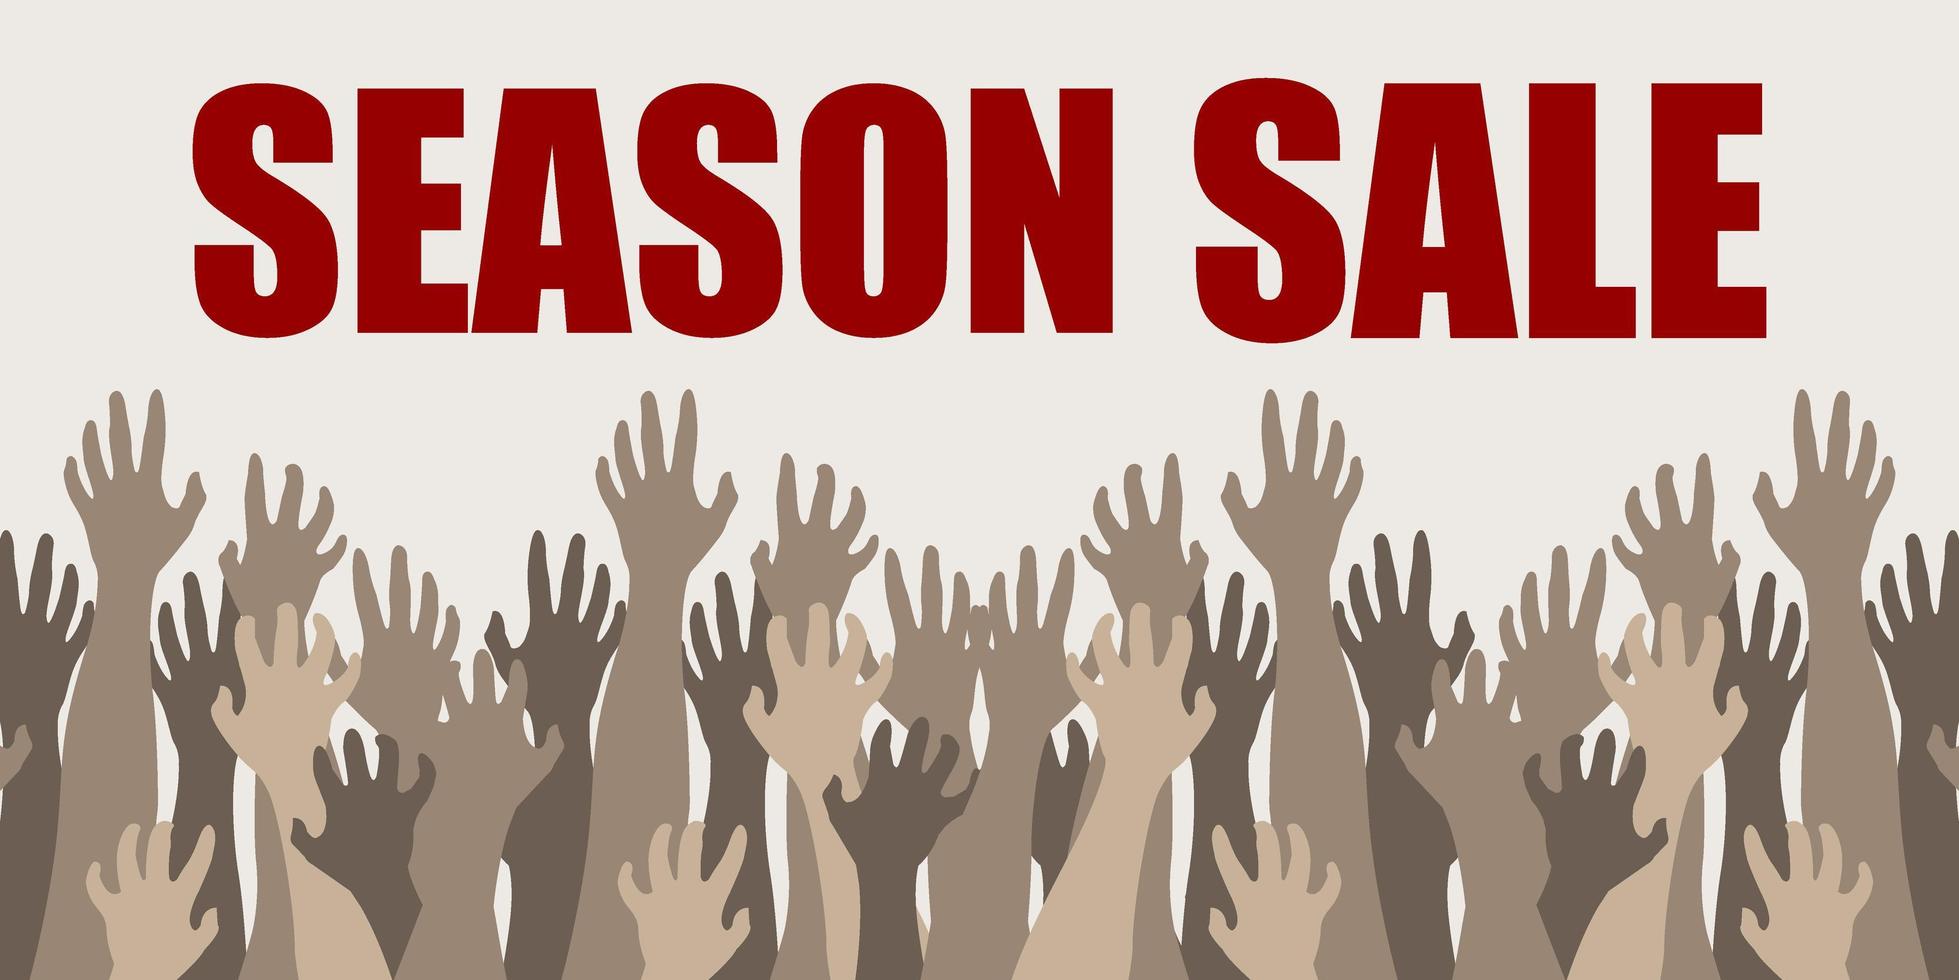 Season sale banner. Silhouettes hands of people with different skin colors eagerly reach for discounts. Vector illustration in flat style.